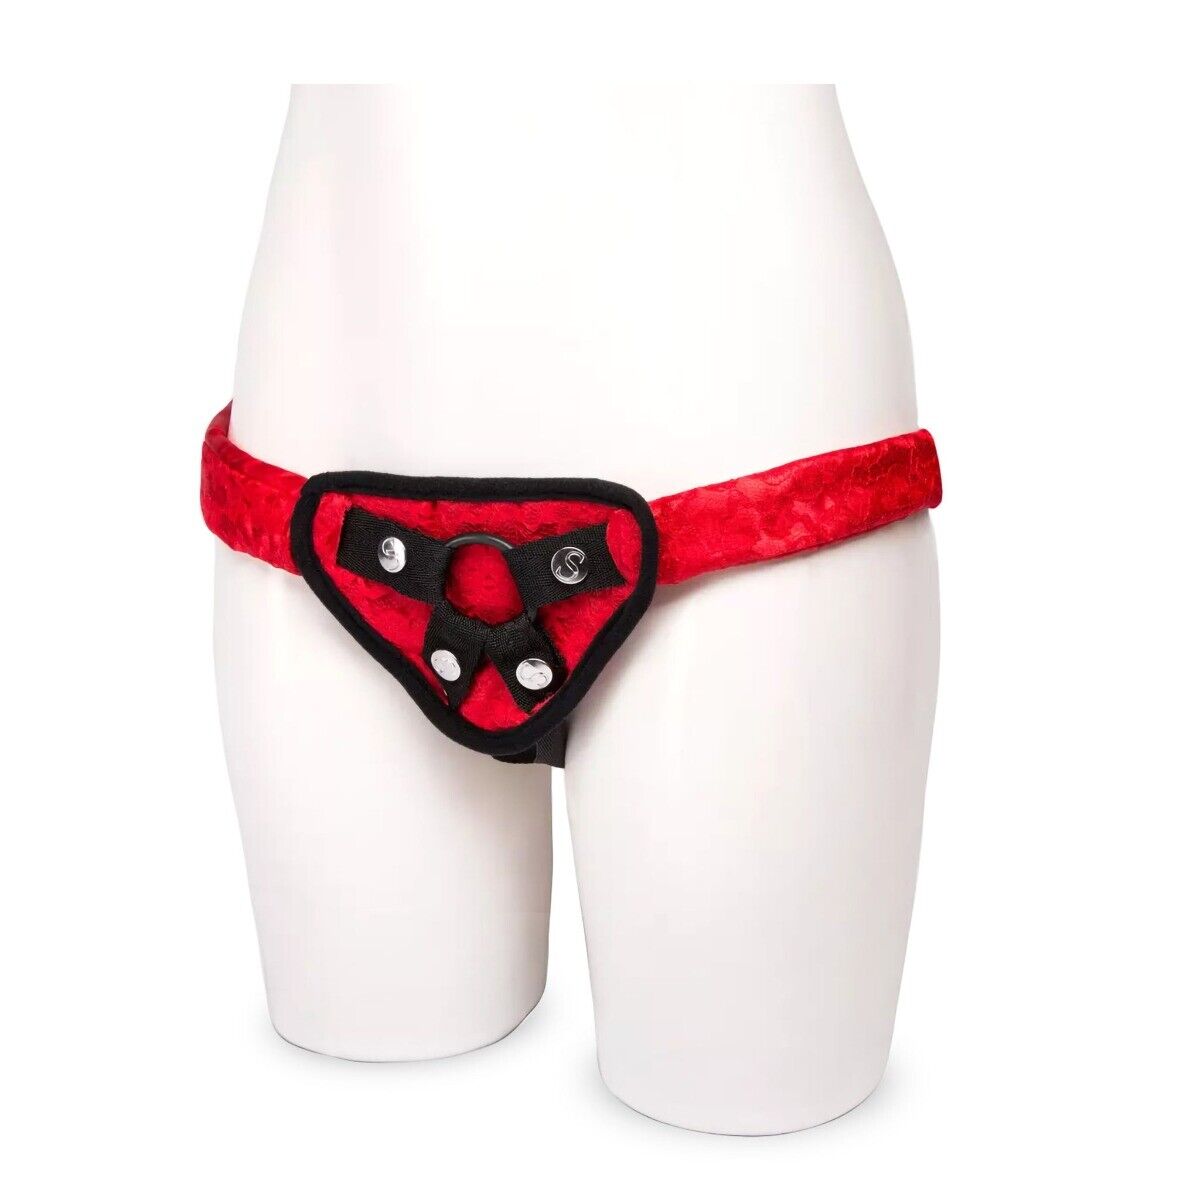 Sportsheets Red Lace Corsette Strap-On Harness with 3 Rubber O-rings